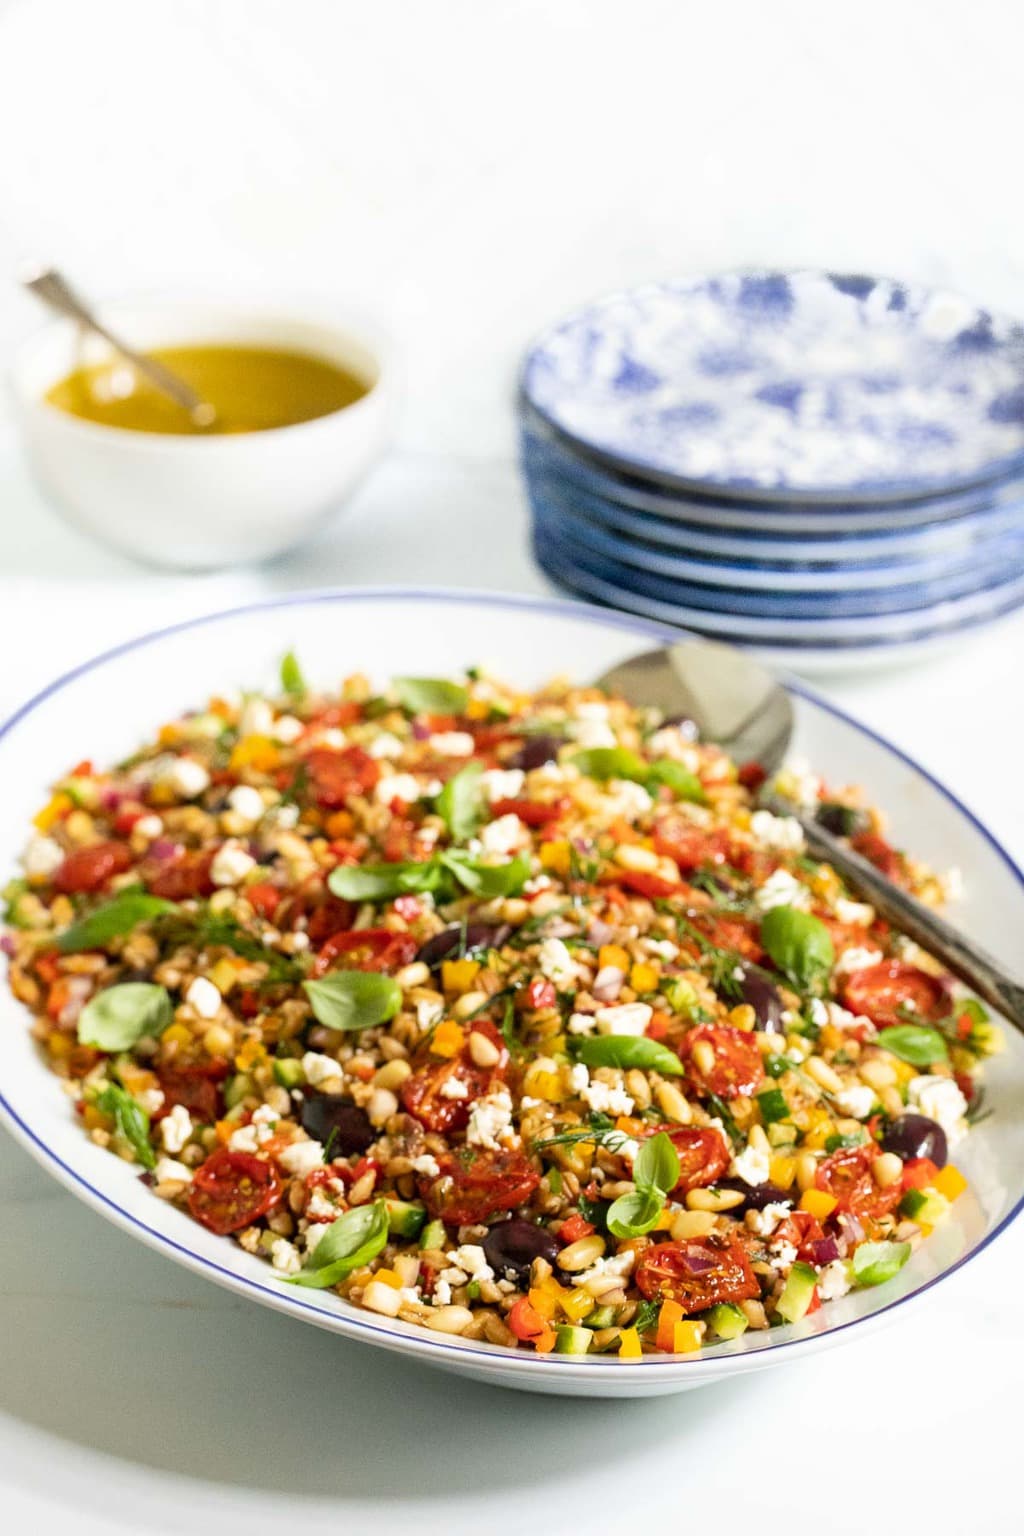 Vertical photo of a Chopped Mediterranean Farro Salad in a blue and white serving platter.